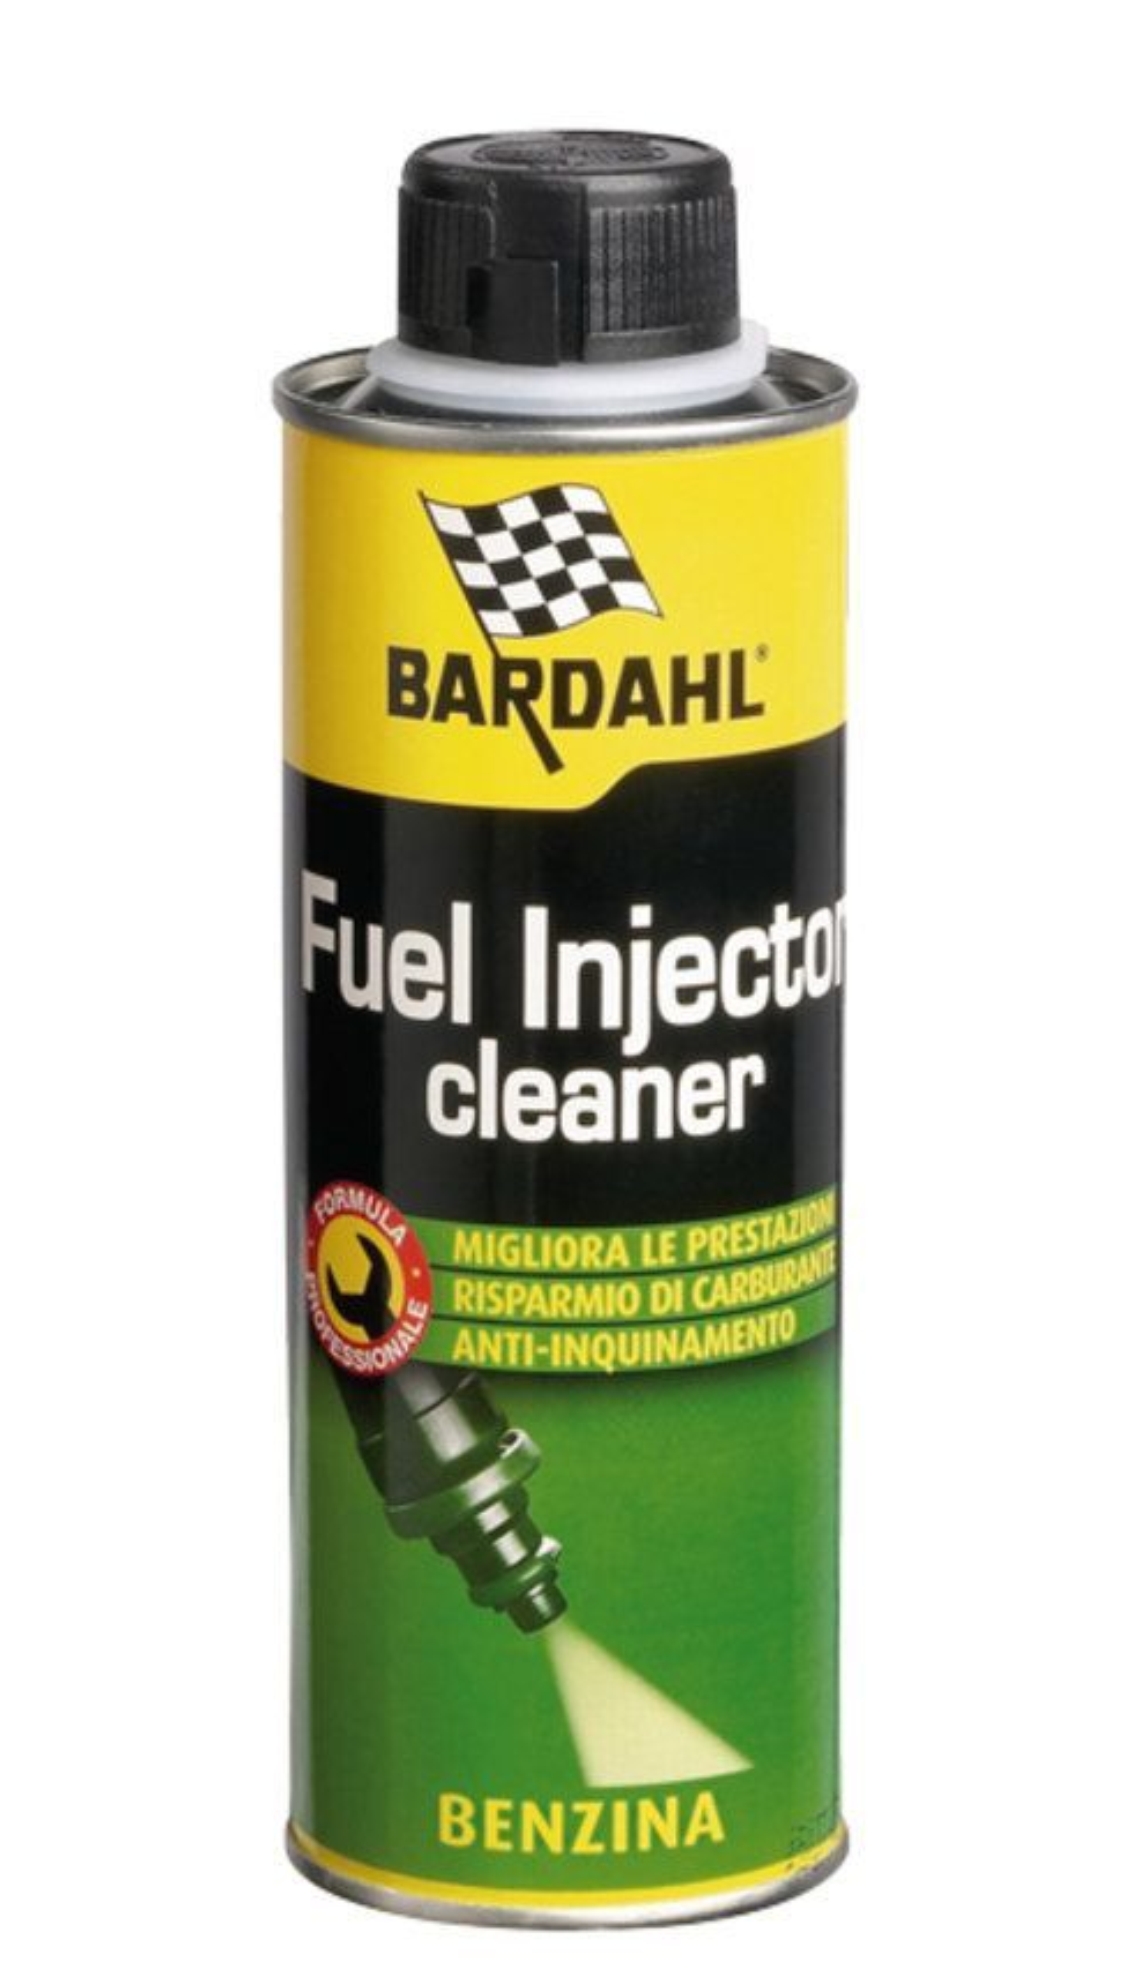 Присадка для бензинаBardahl Concentrated Fuel Injector Cleaner